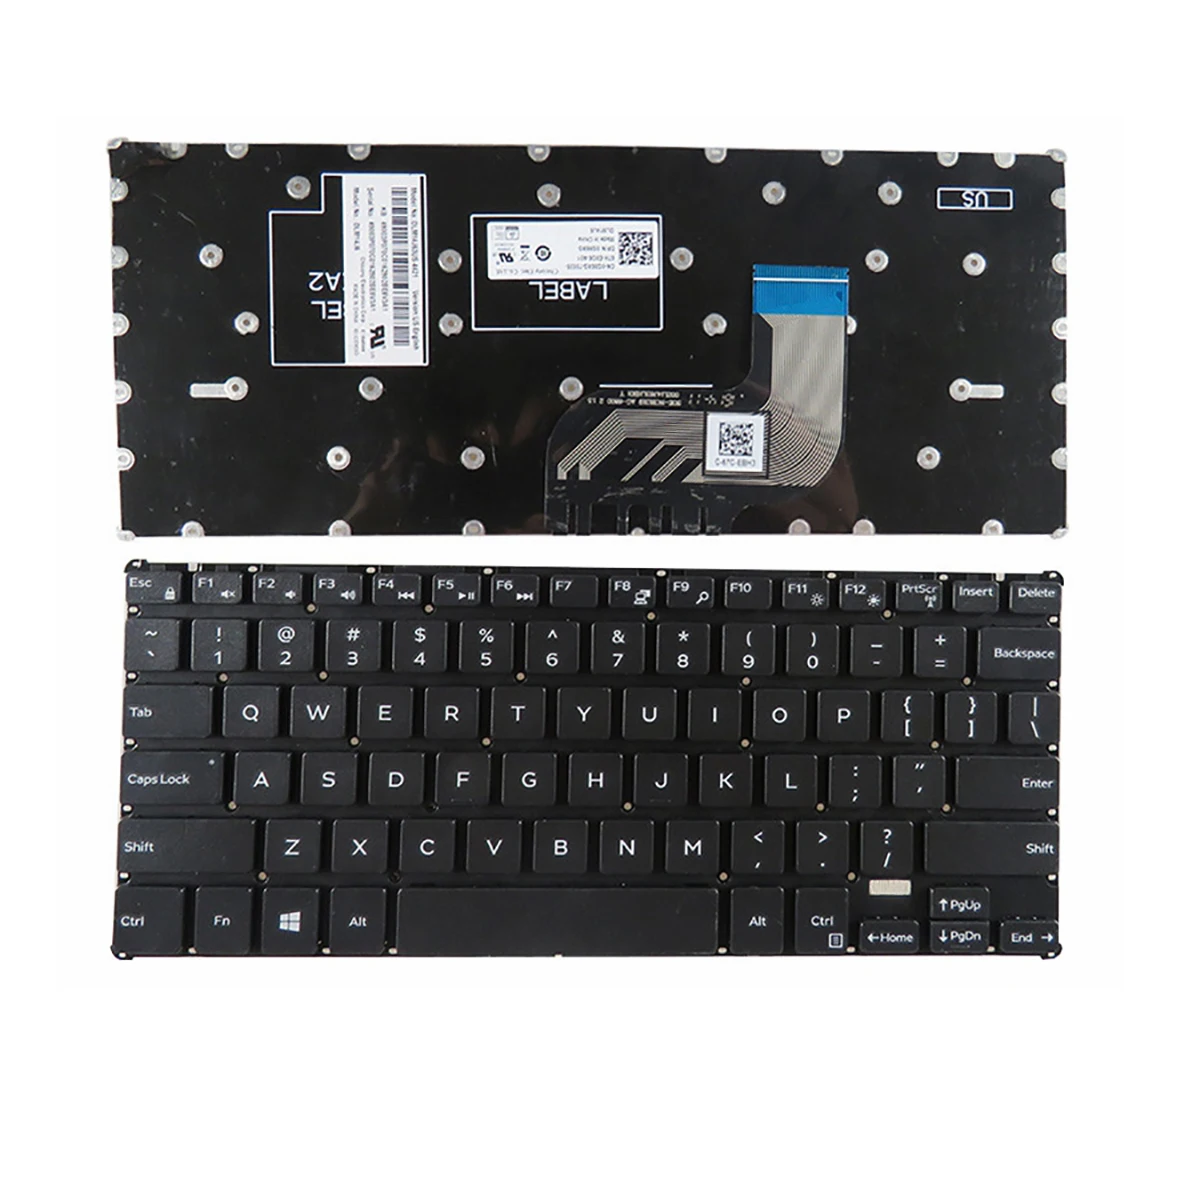 

New for Dell Inspiron 11 3000 Series 11 3162 3164 3168 3169 3179 P25T D1208R Laptop Keyboard 0G96XG DLM14J6 US English